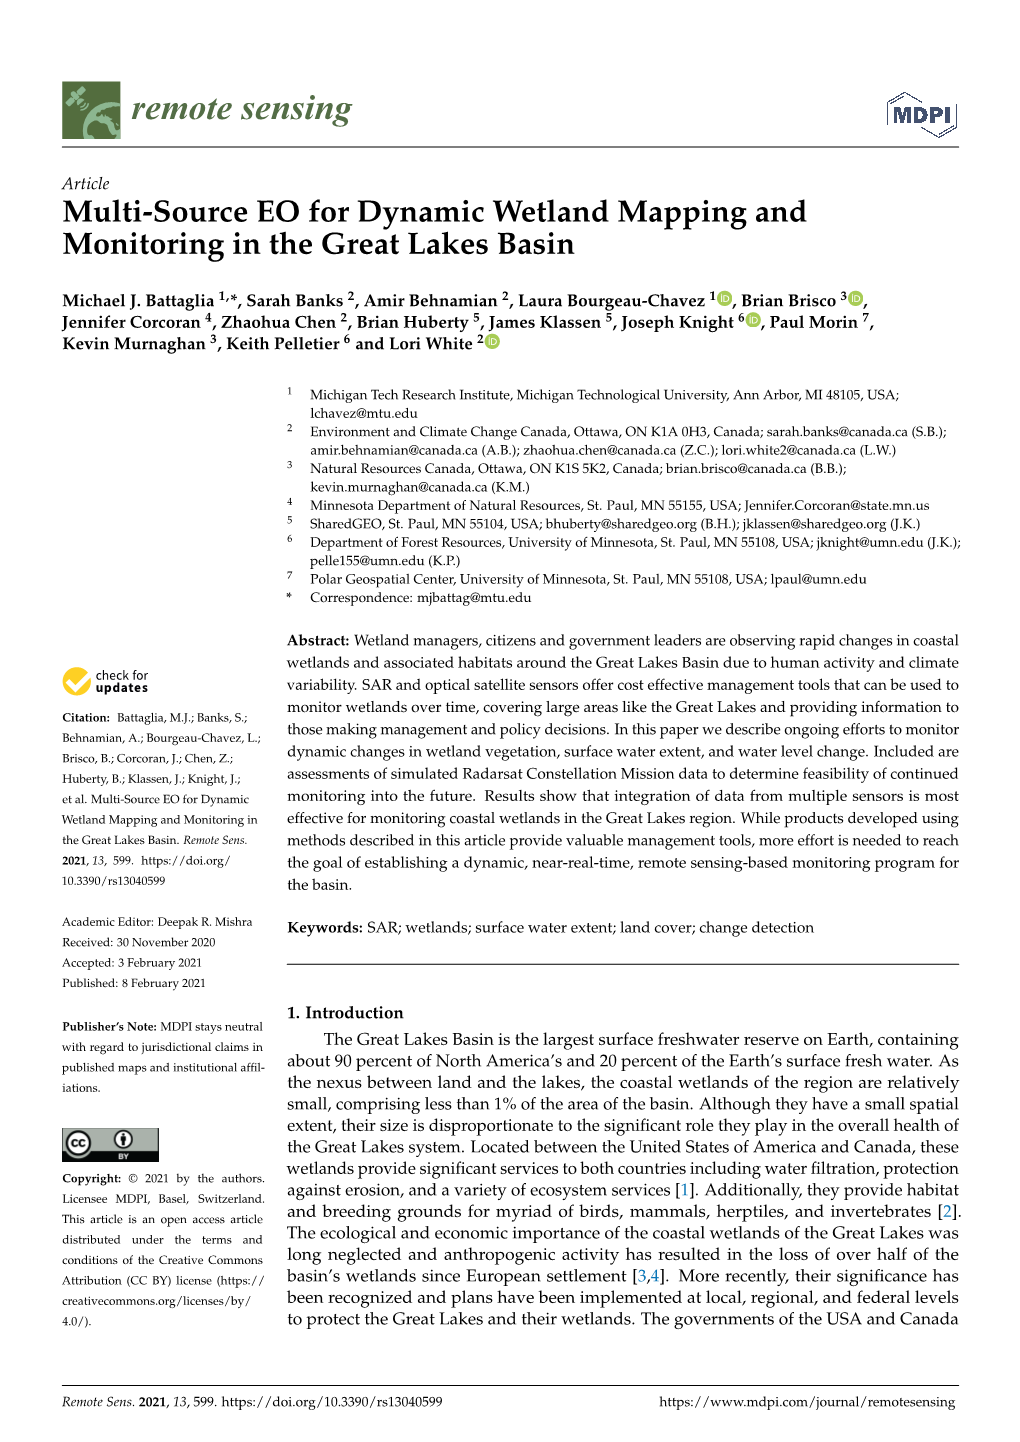 Multi-Source EO for Dynamic Wetland Mapping and Monitoring in the Great Lakes Basin